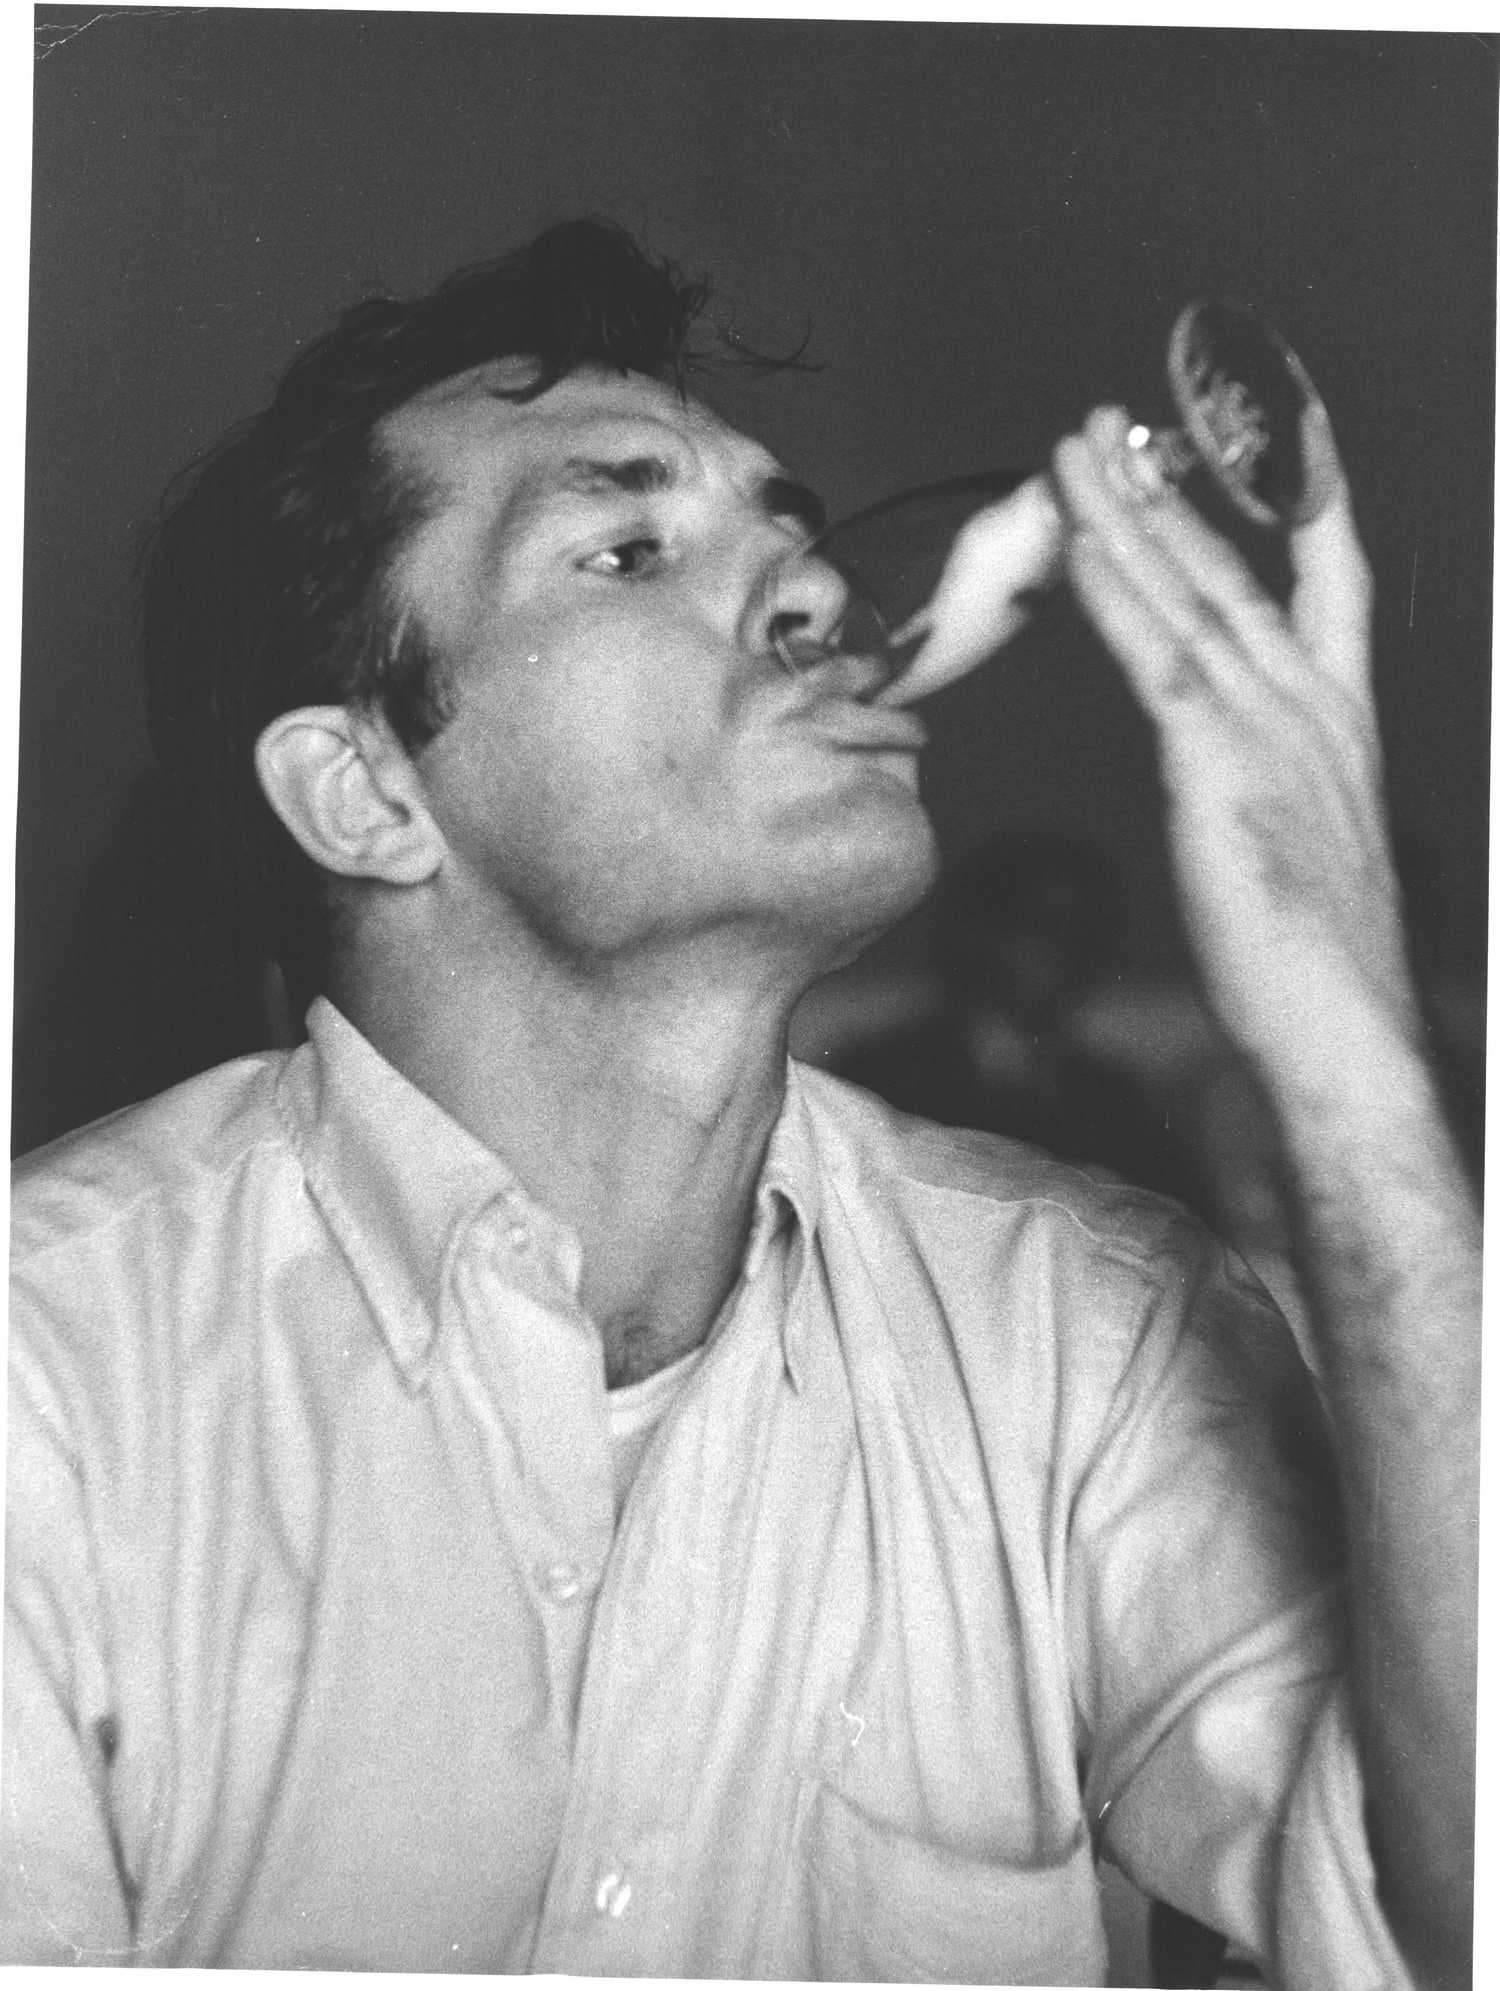 Jerry Yulsman Black and White Photograph - Jack Keouac Drinking in NYC 1957 Original Vintage Oversized Print